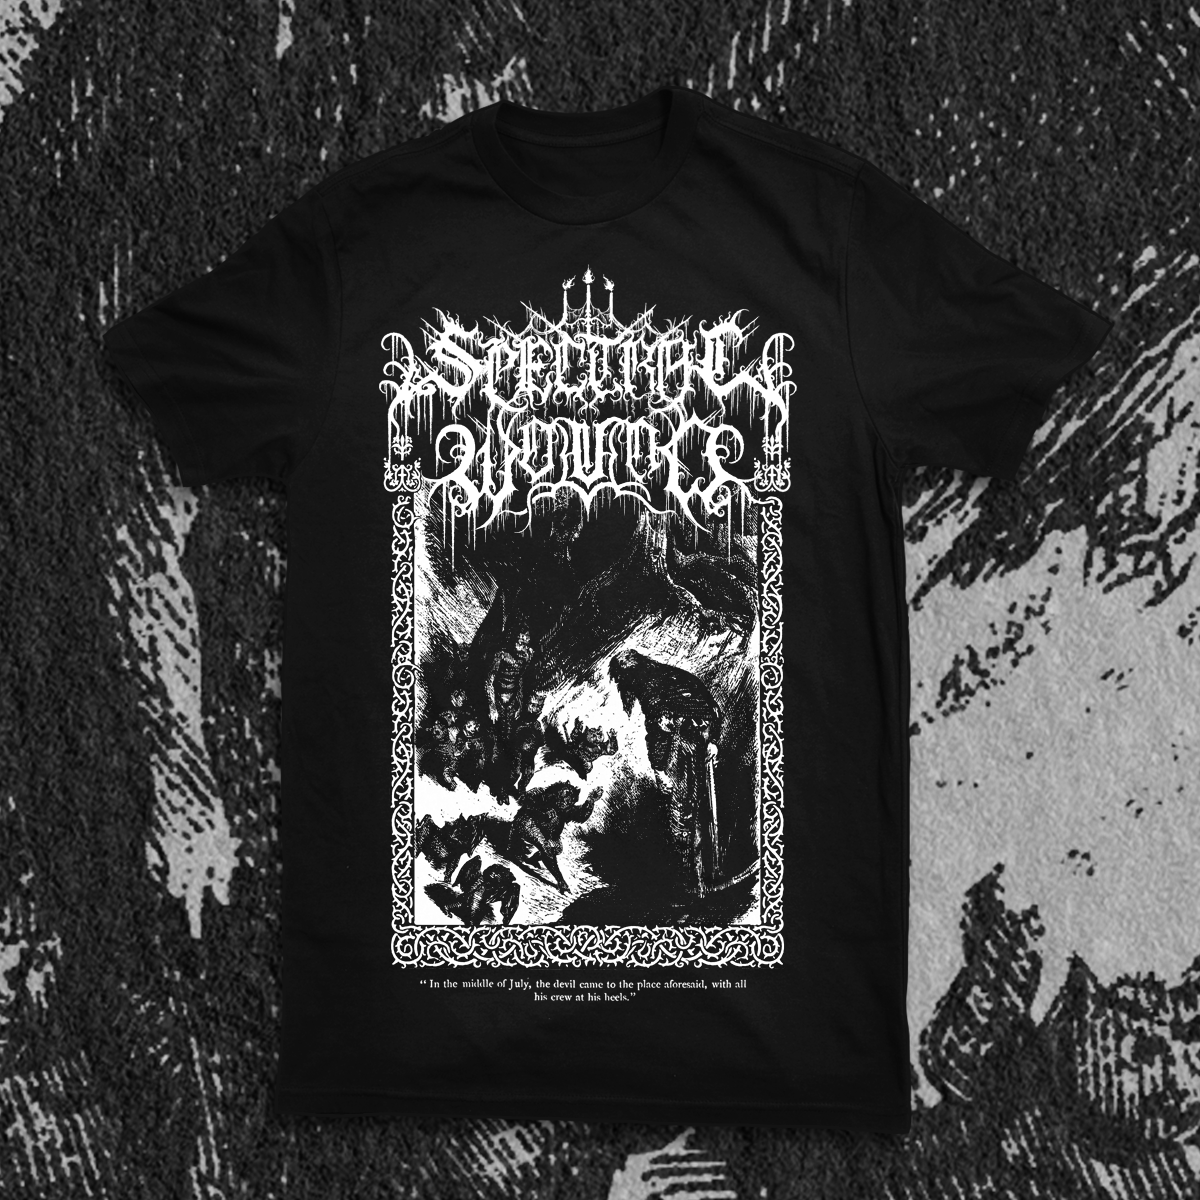 SPECTRAL WOUND "THE DEVIL" SHIRT (PRE-ORDER)